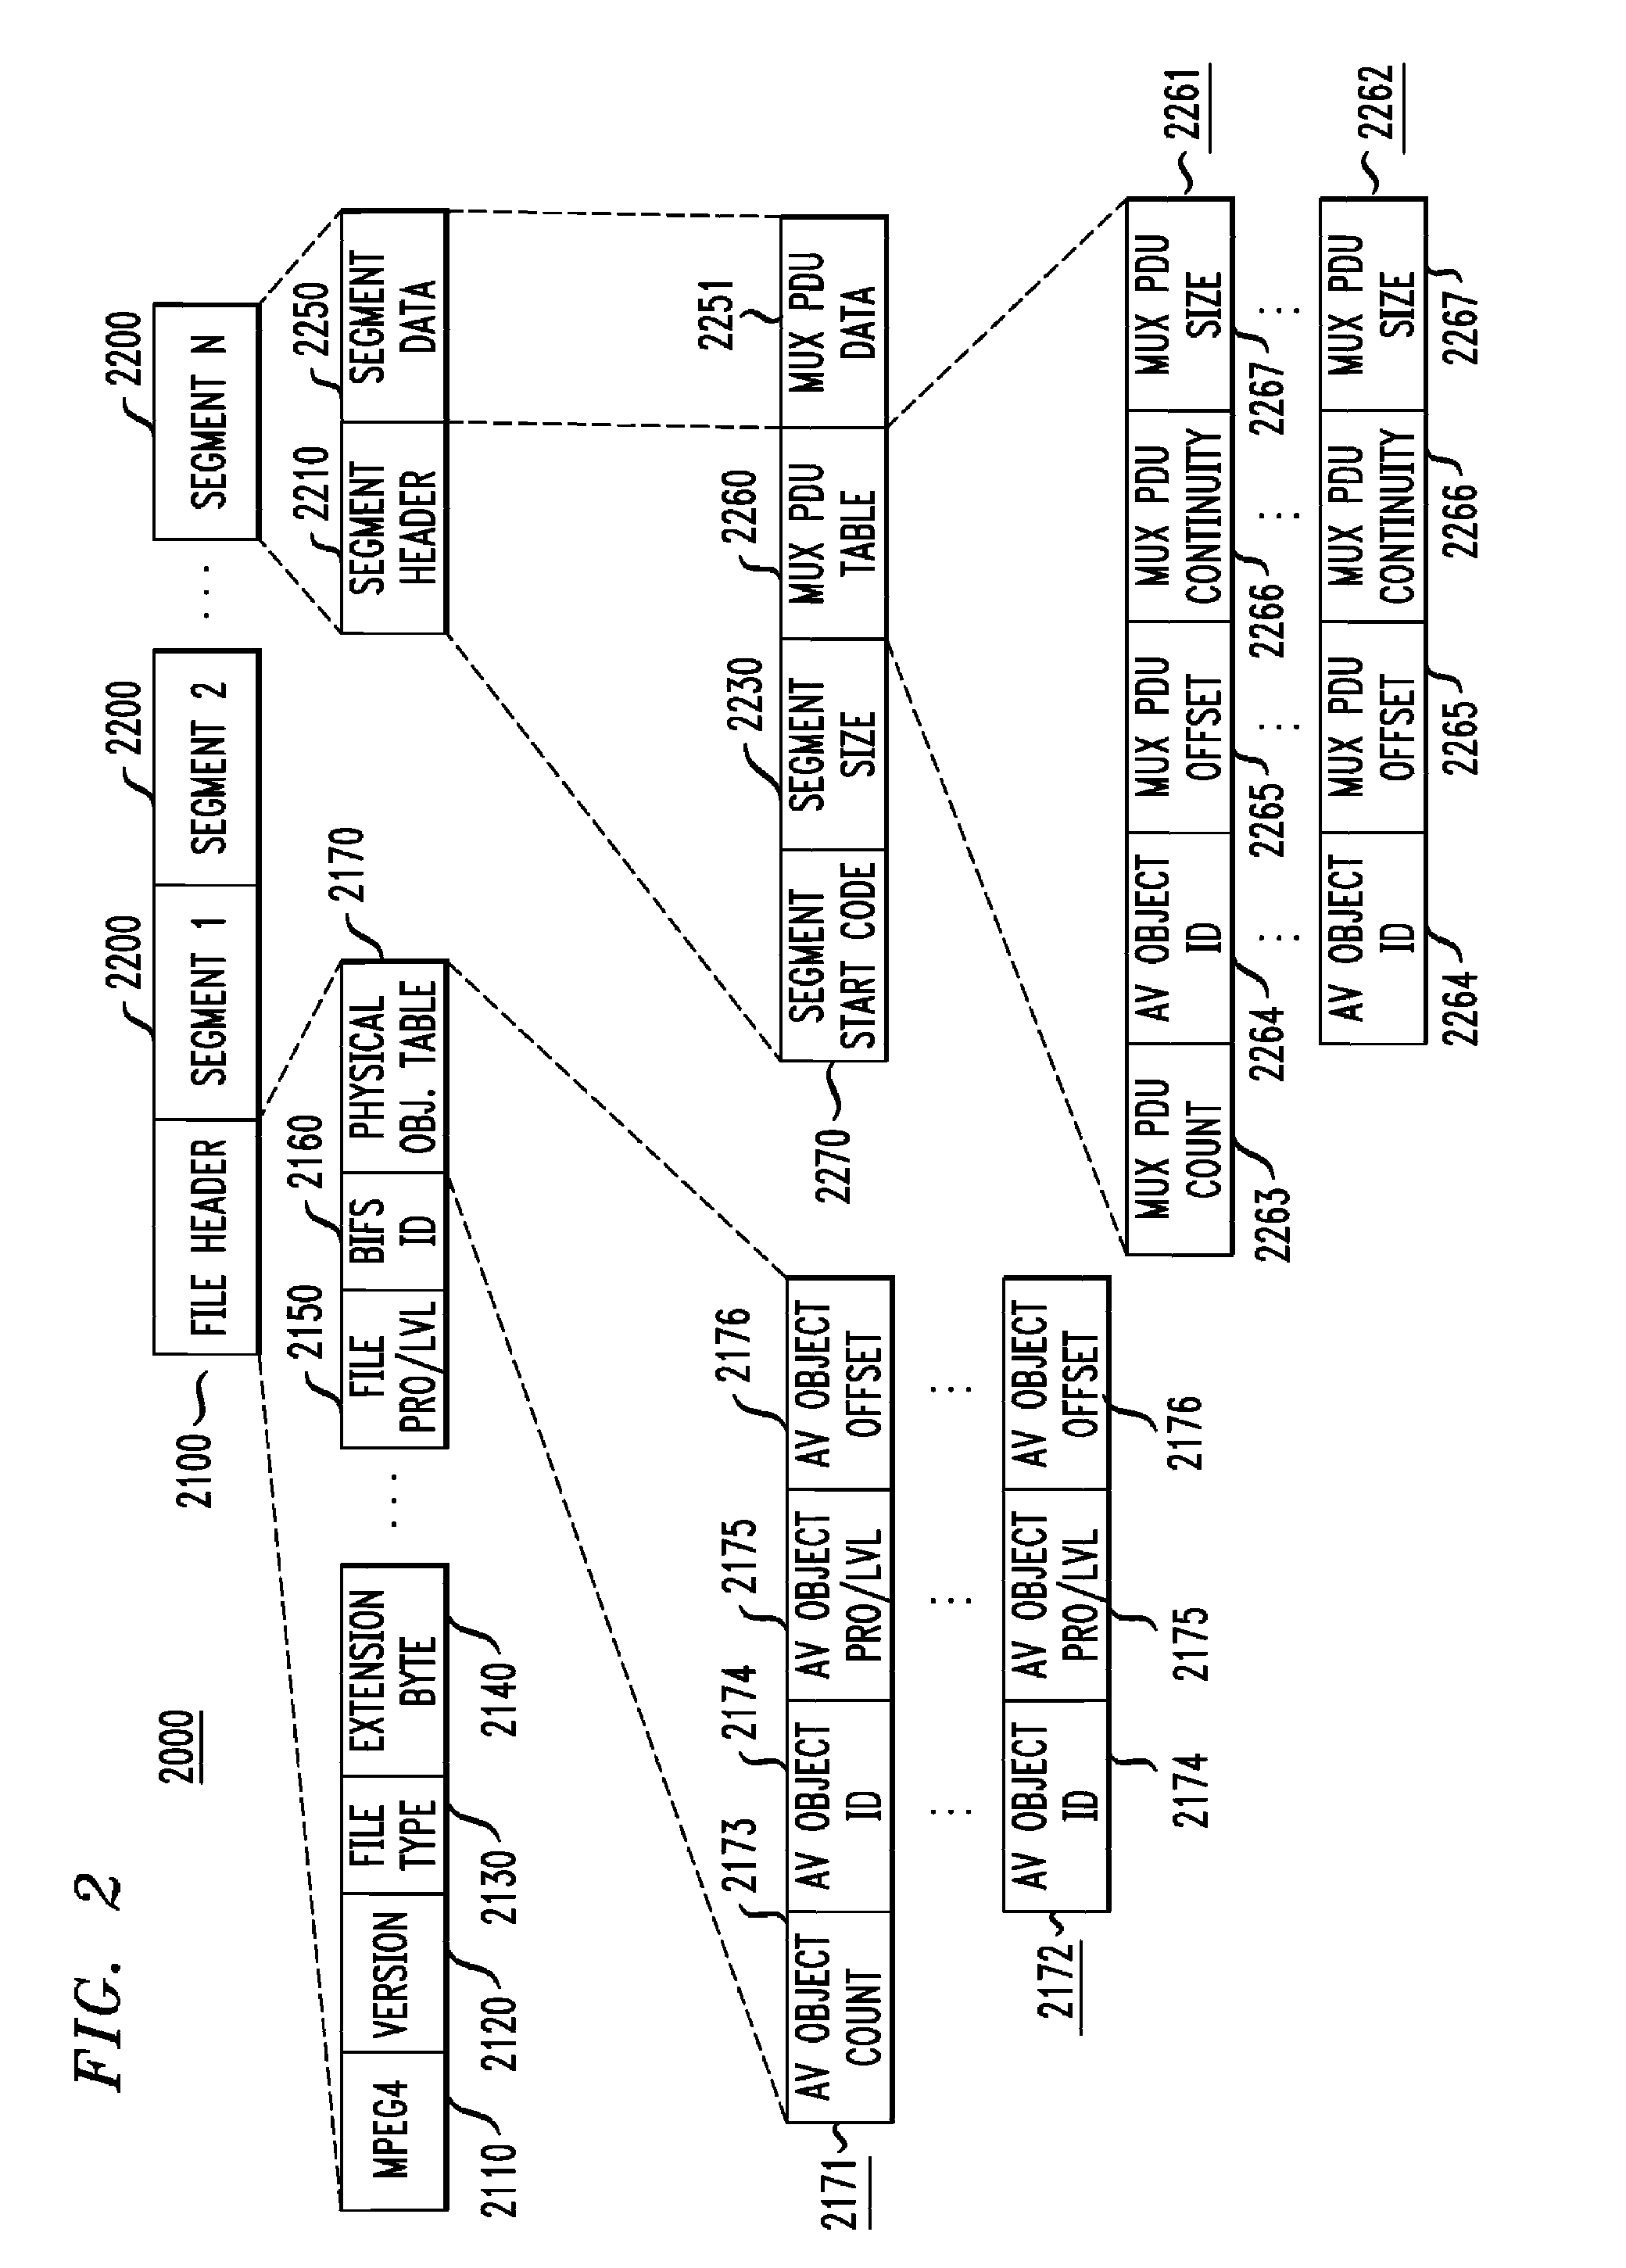 System and method of organizing data to facilitate access and streaming